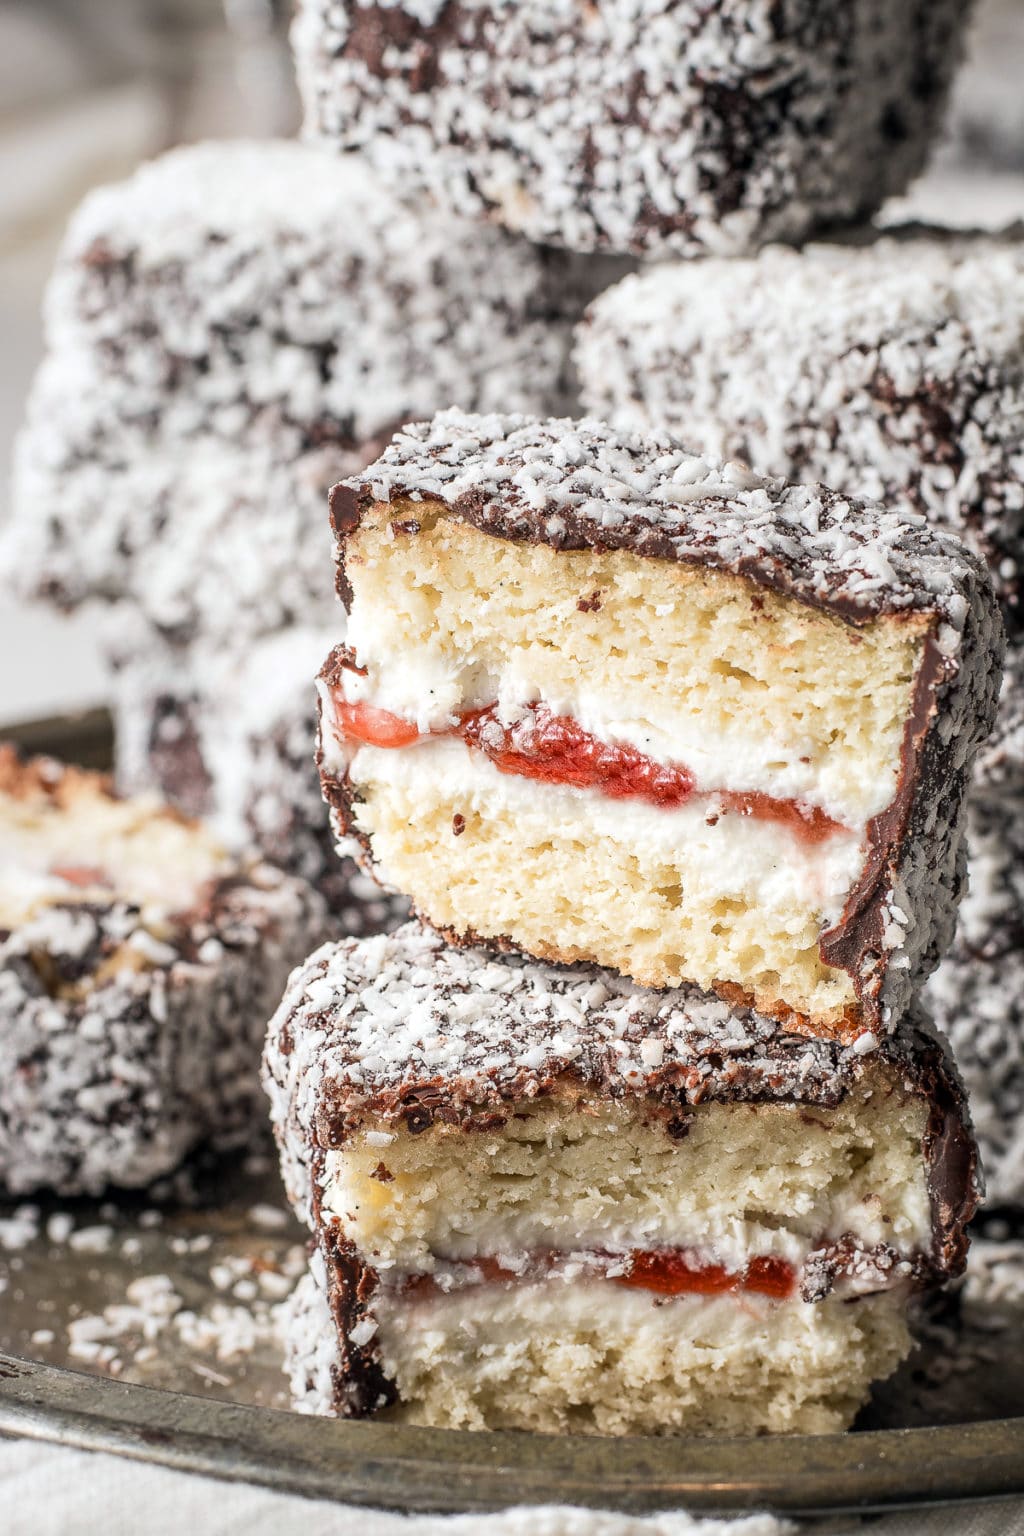 Gluten-free Lamington Recipe with Jam Filling (Low Carb Too!)